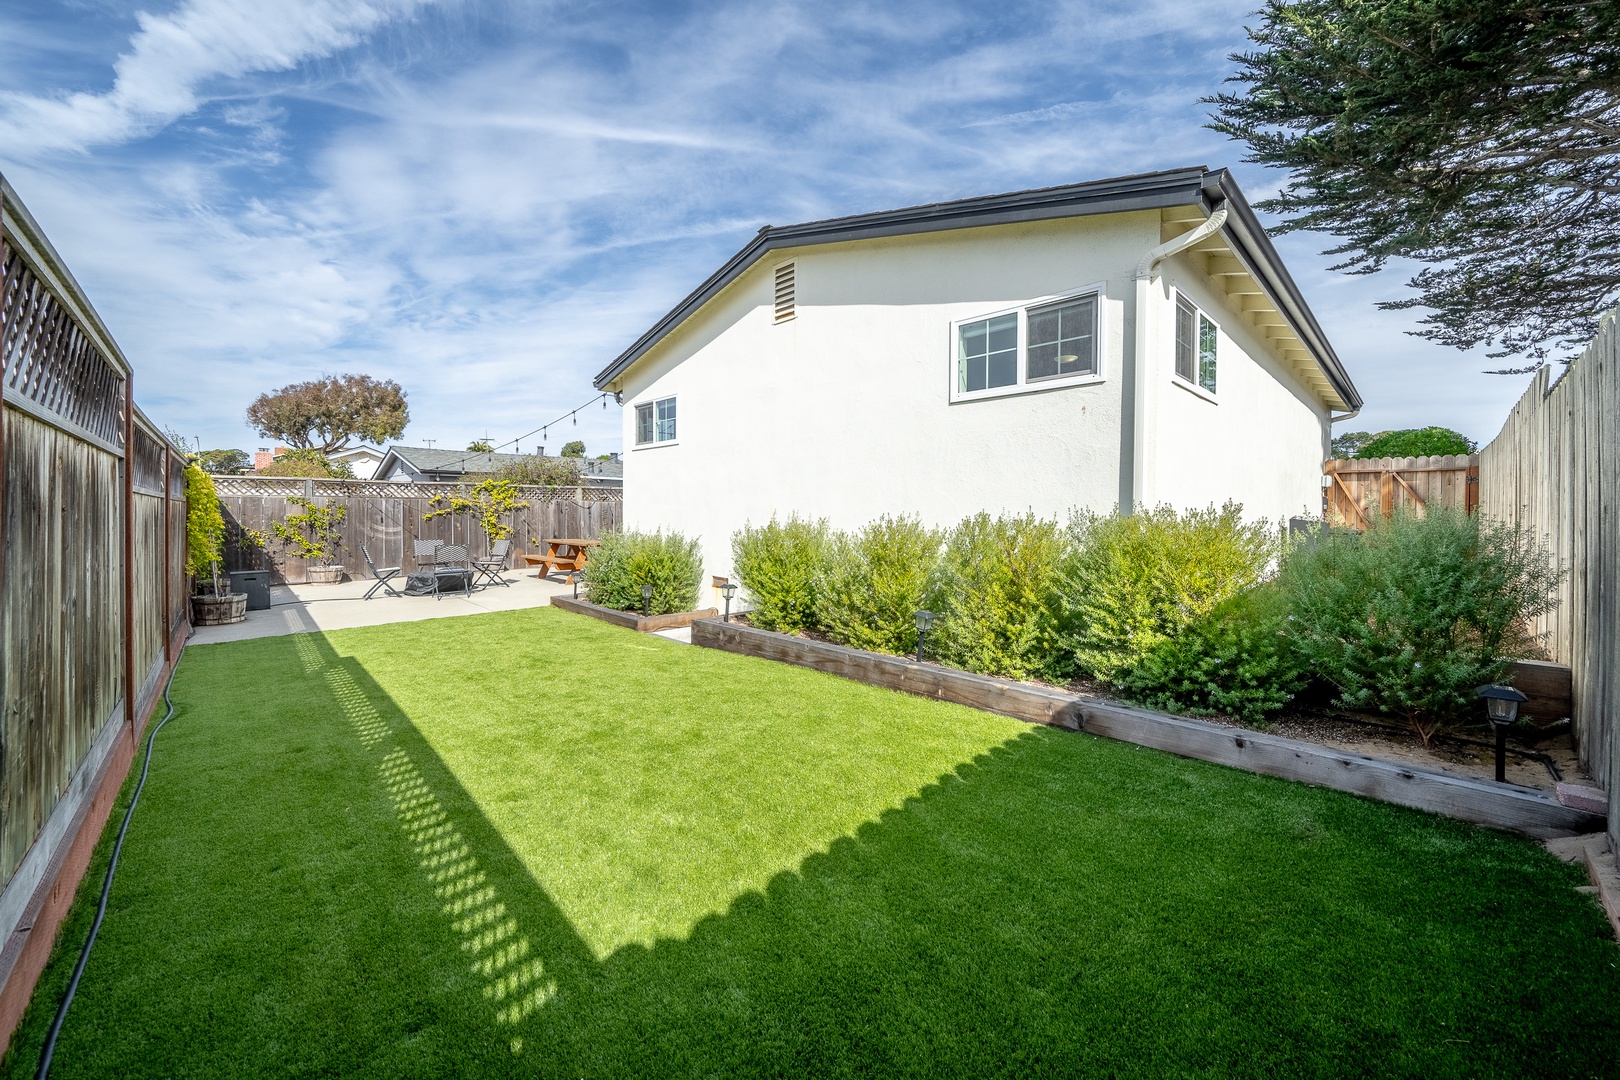 The private back yard offers ample space for relaxation, dining, & play